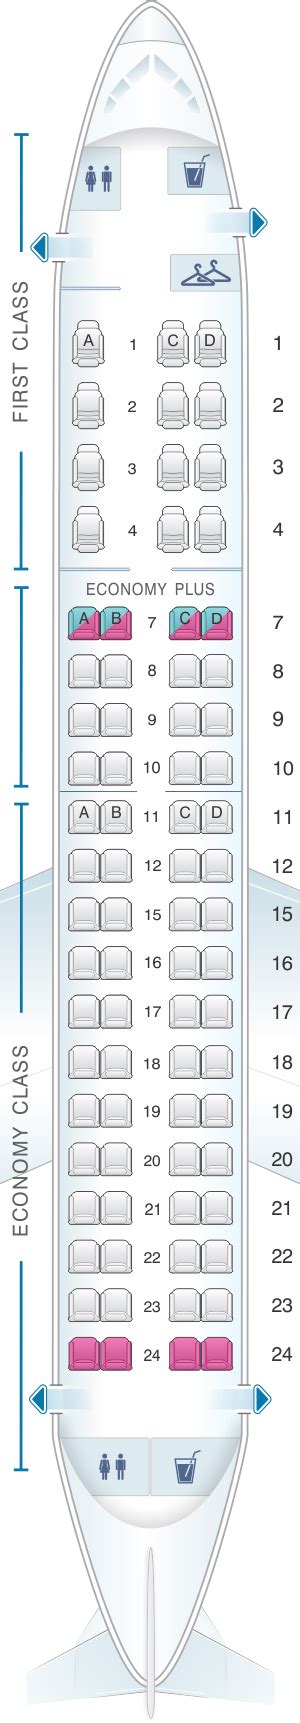 United embraer 175 seat map. Inside Embraer 175 United: Best Seats. There are 76 seats on this jet: 12 first class, 16 economy plus, and 48 economy seats. The Embraer 175 United seat map shows that there are no middle seats on the aircraft. … 